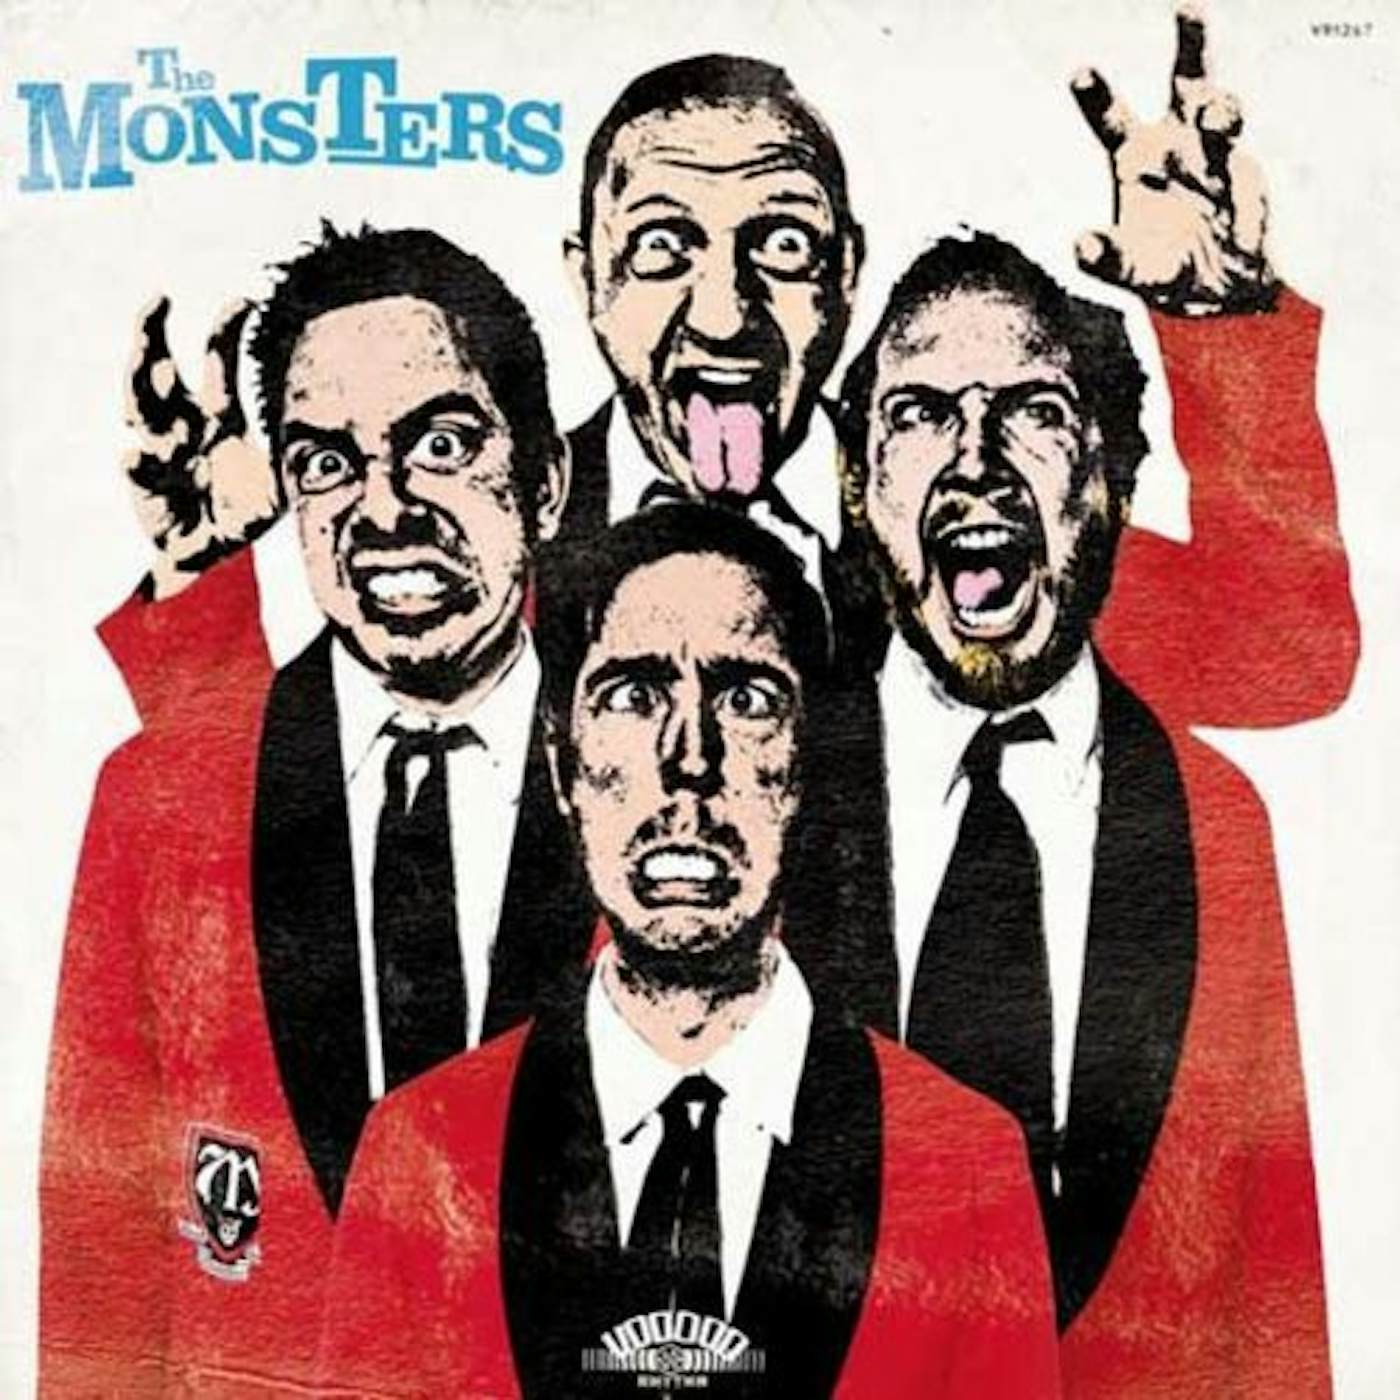 The Monsters Pop up Yours Vinyl Record